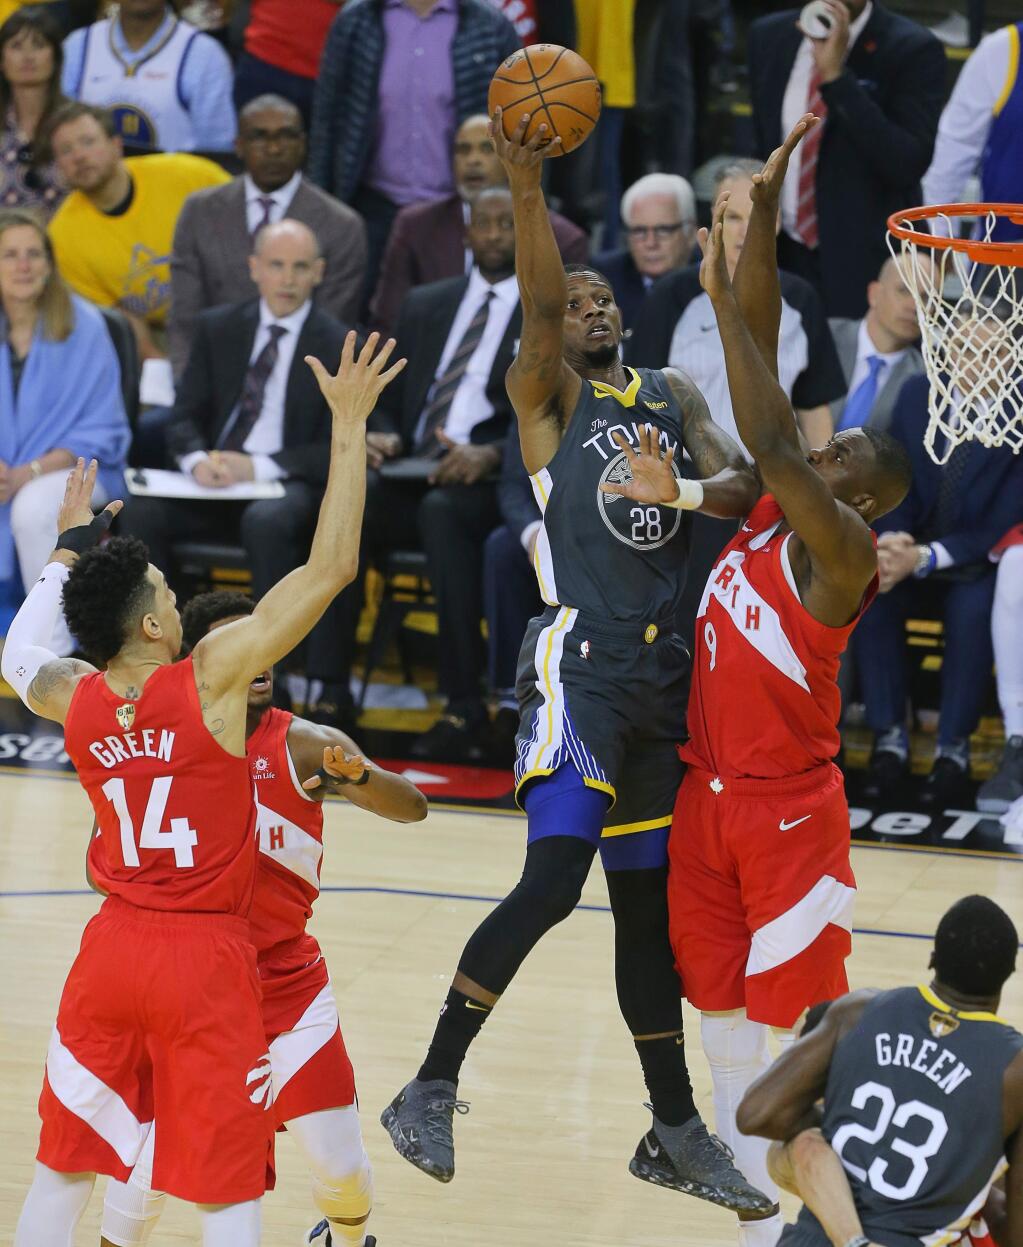 Golden State Warriors forward Alfonzo McKinnie shoots over Toronto Raptors center Serge Ibaka during Game 4 of the NBA Finals in Oakland on Friday, June 7, 2019. (Christopher Chung / The Press Democrat)